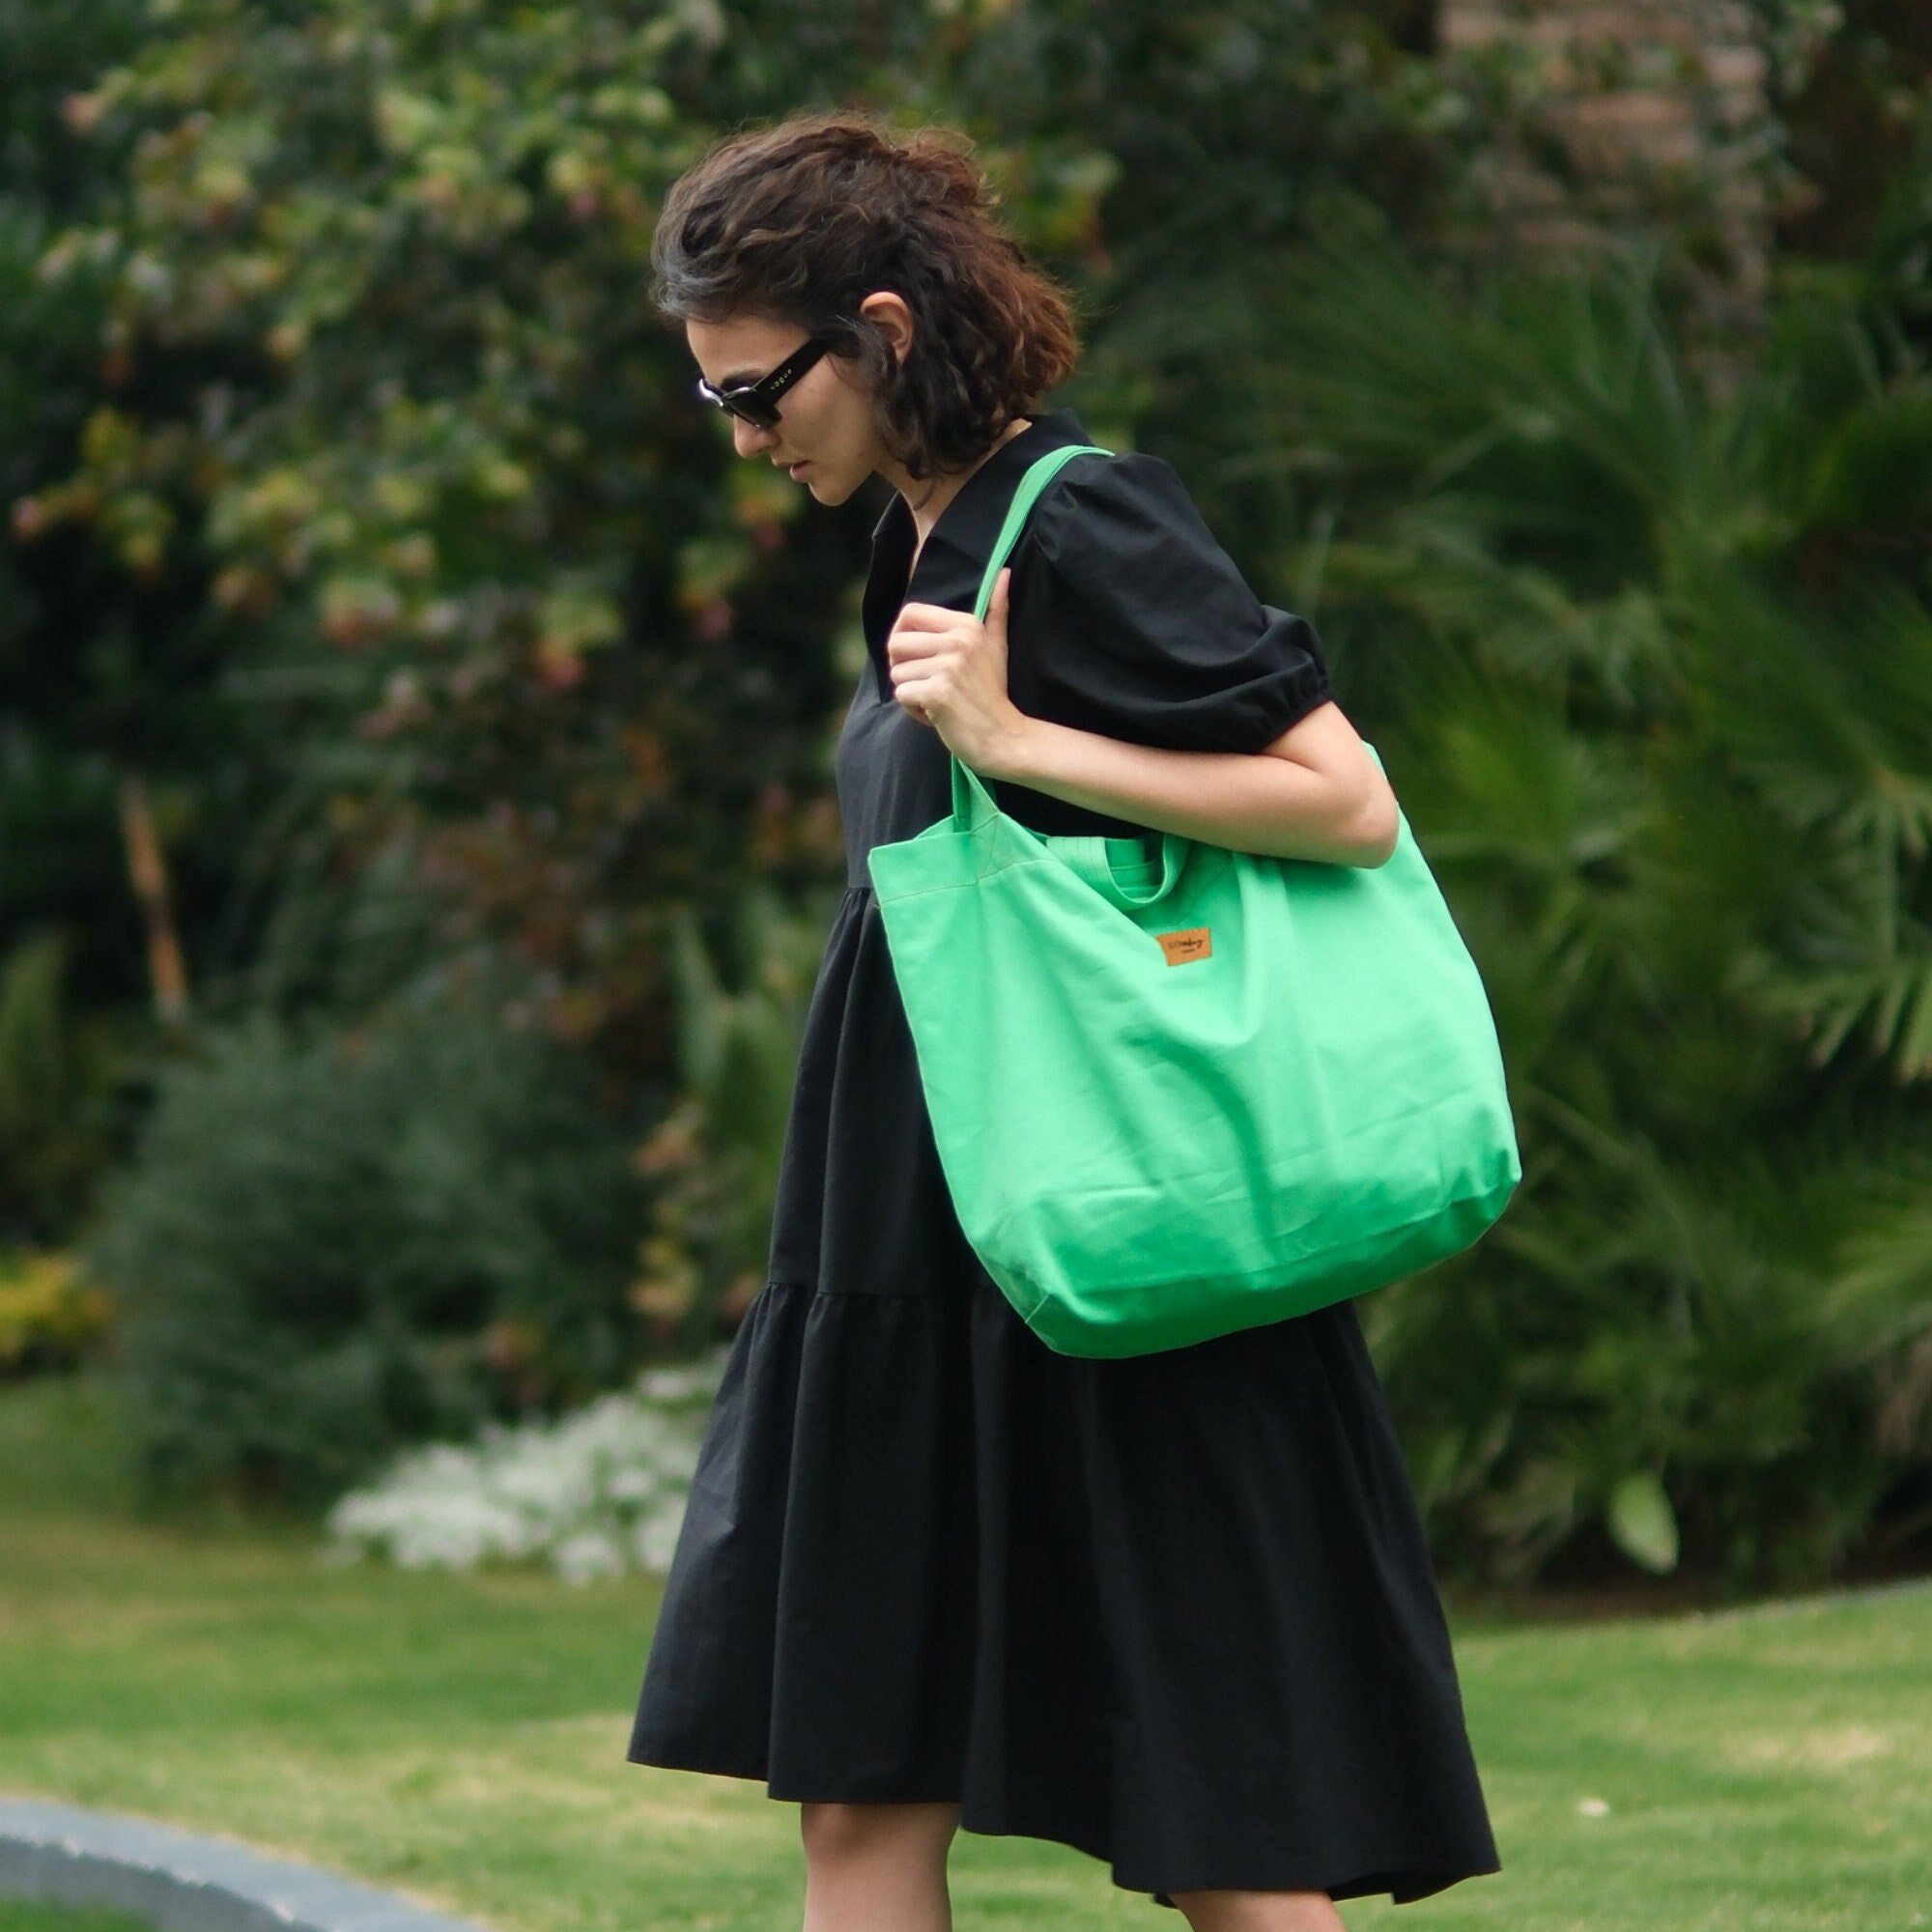 Green Tote Bags for Women